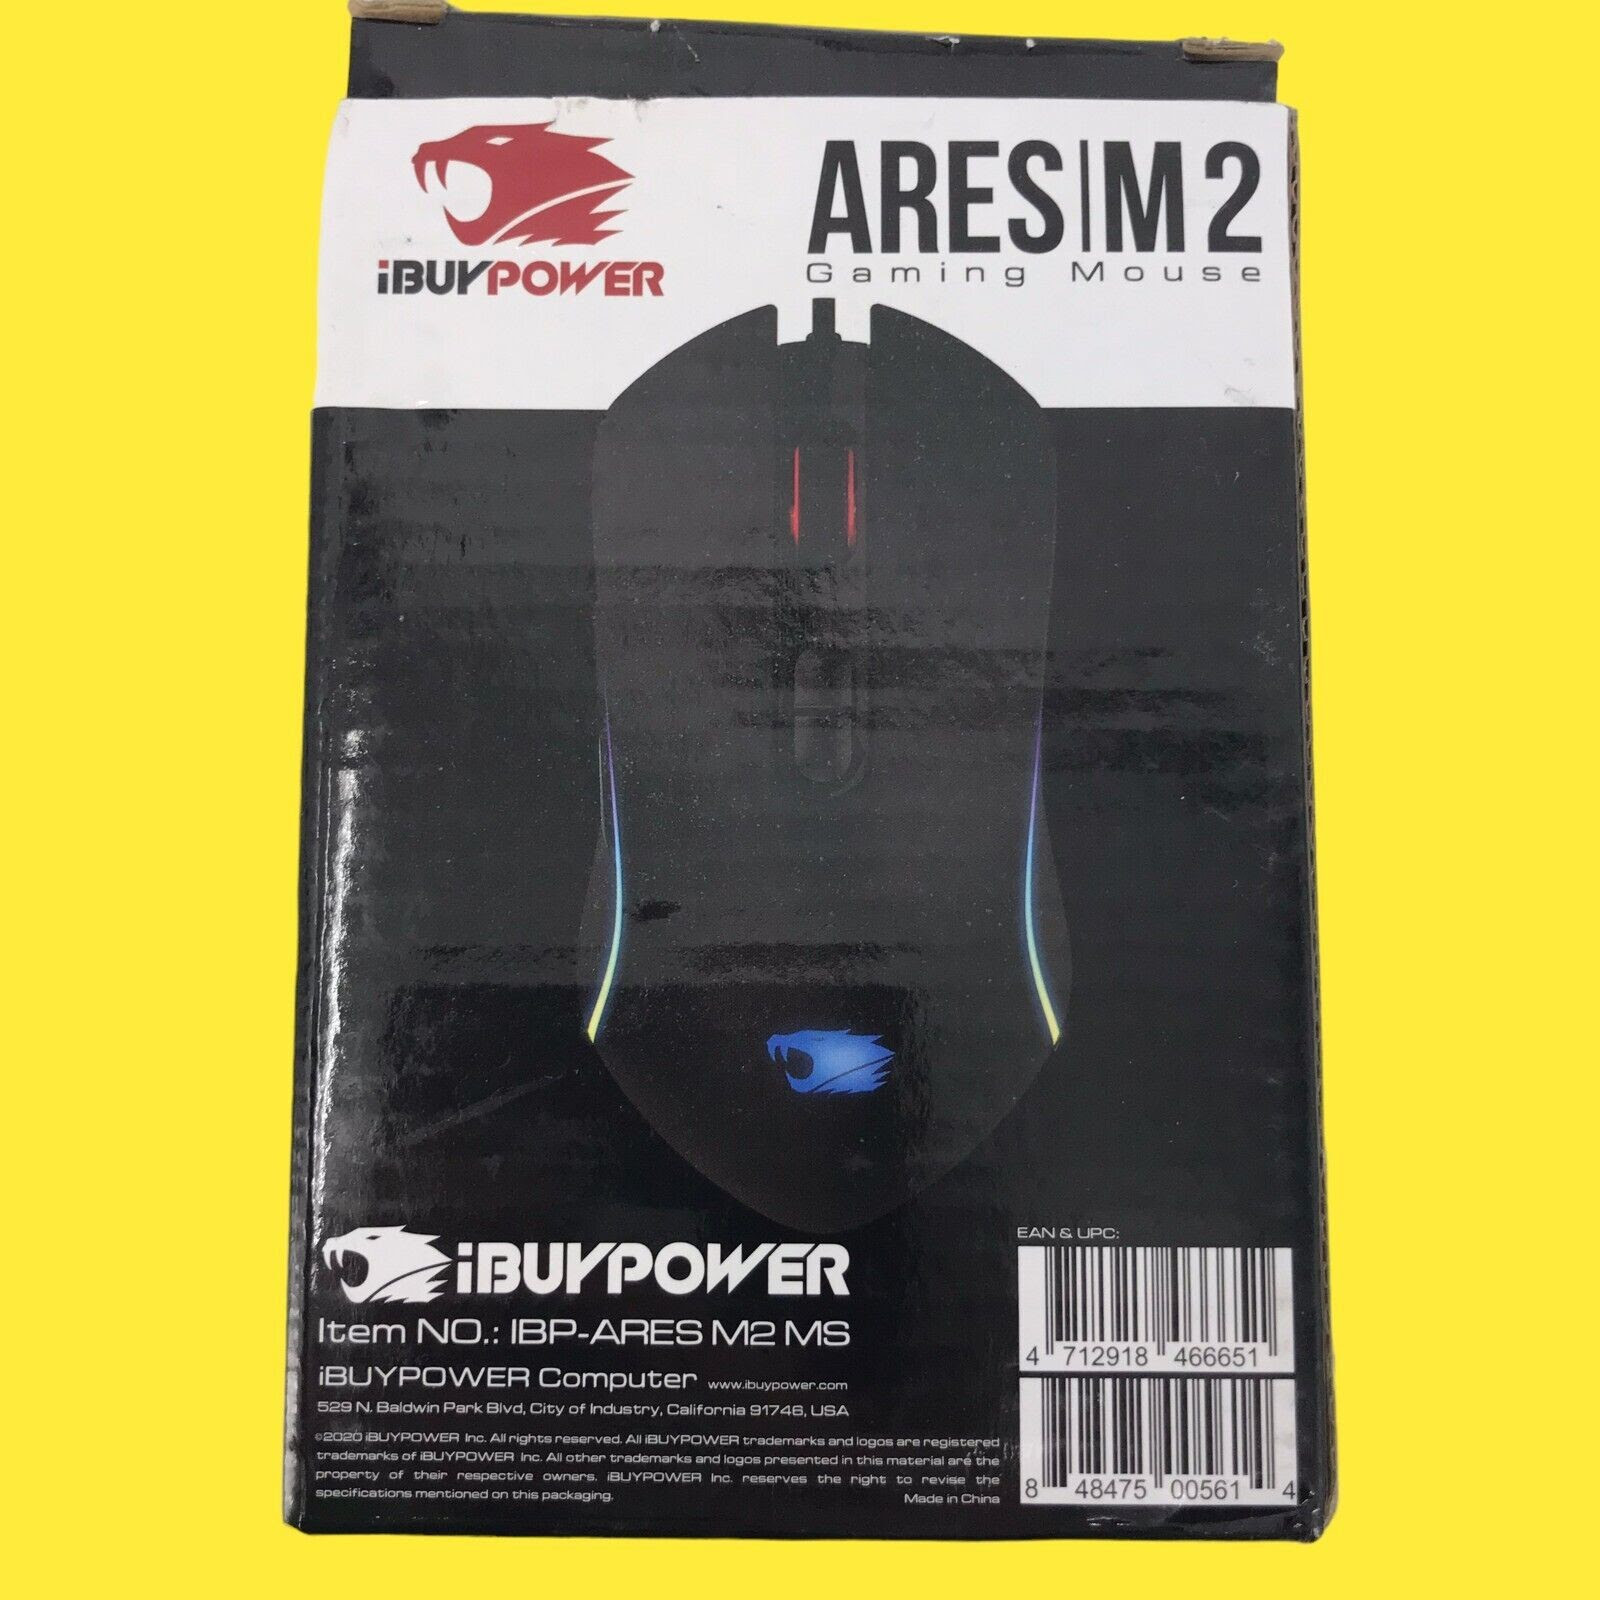 iBuyPower Ares M2 Gaming Mouse.  3974units. EXW Chicago $4.25unit.